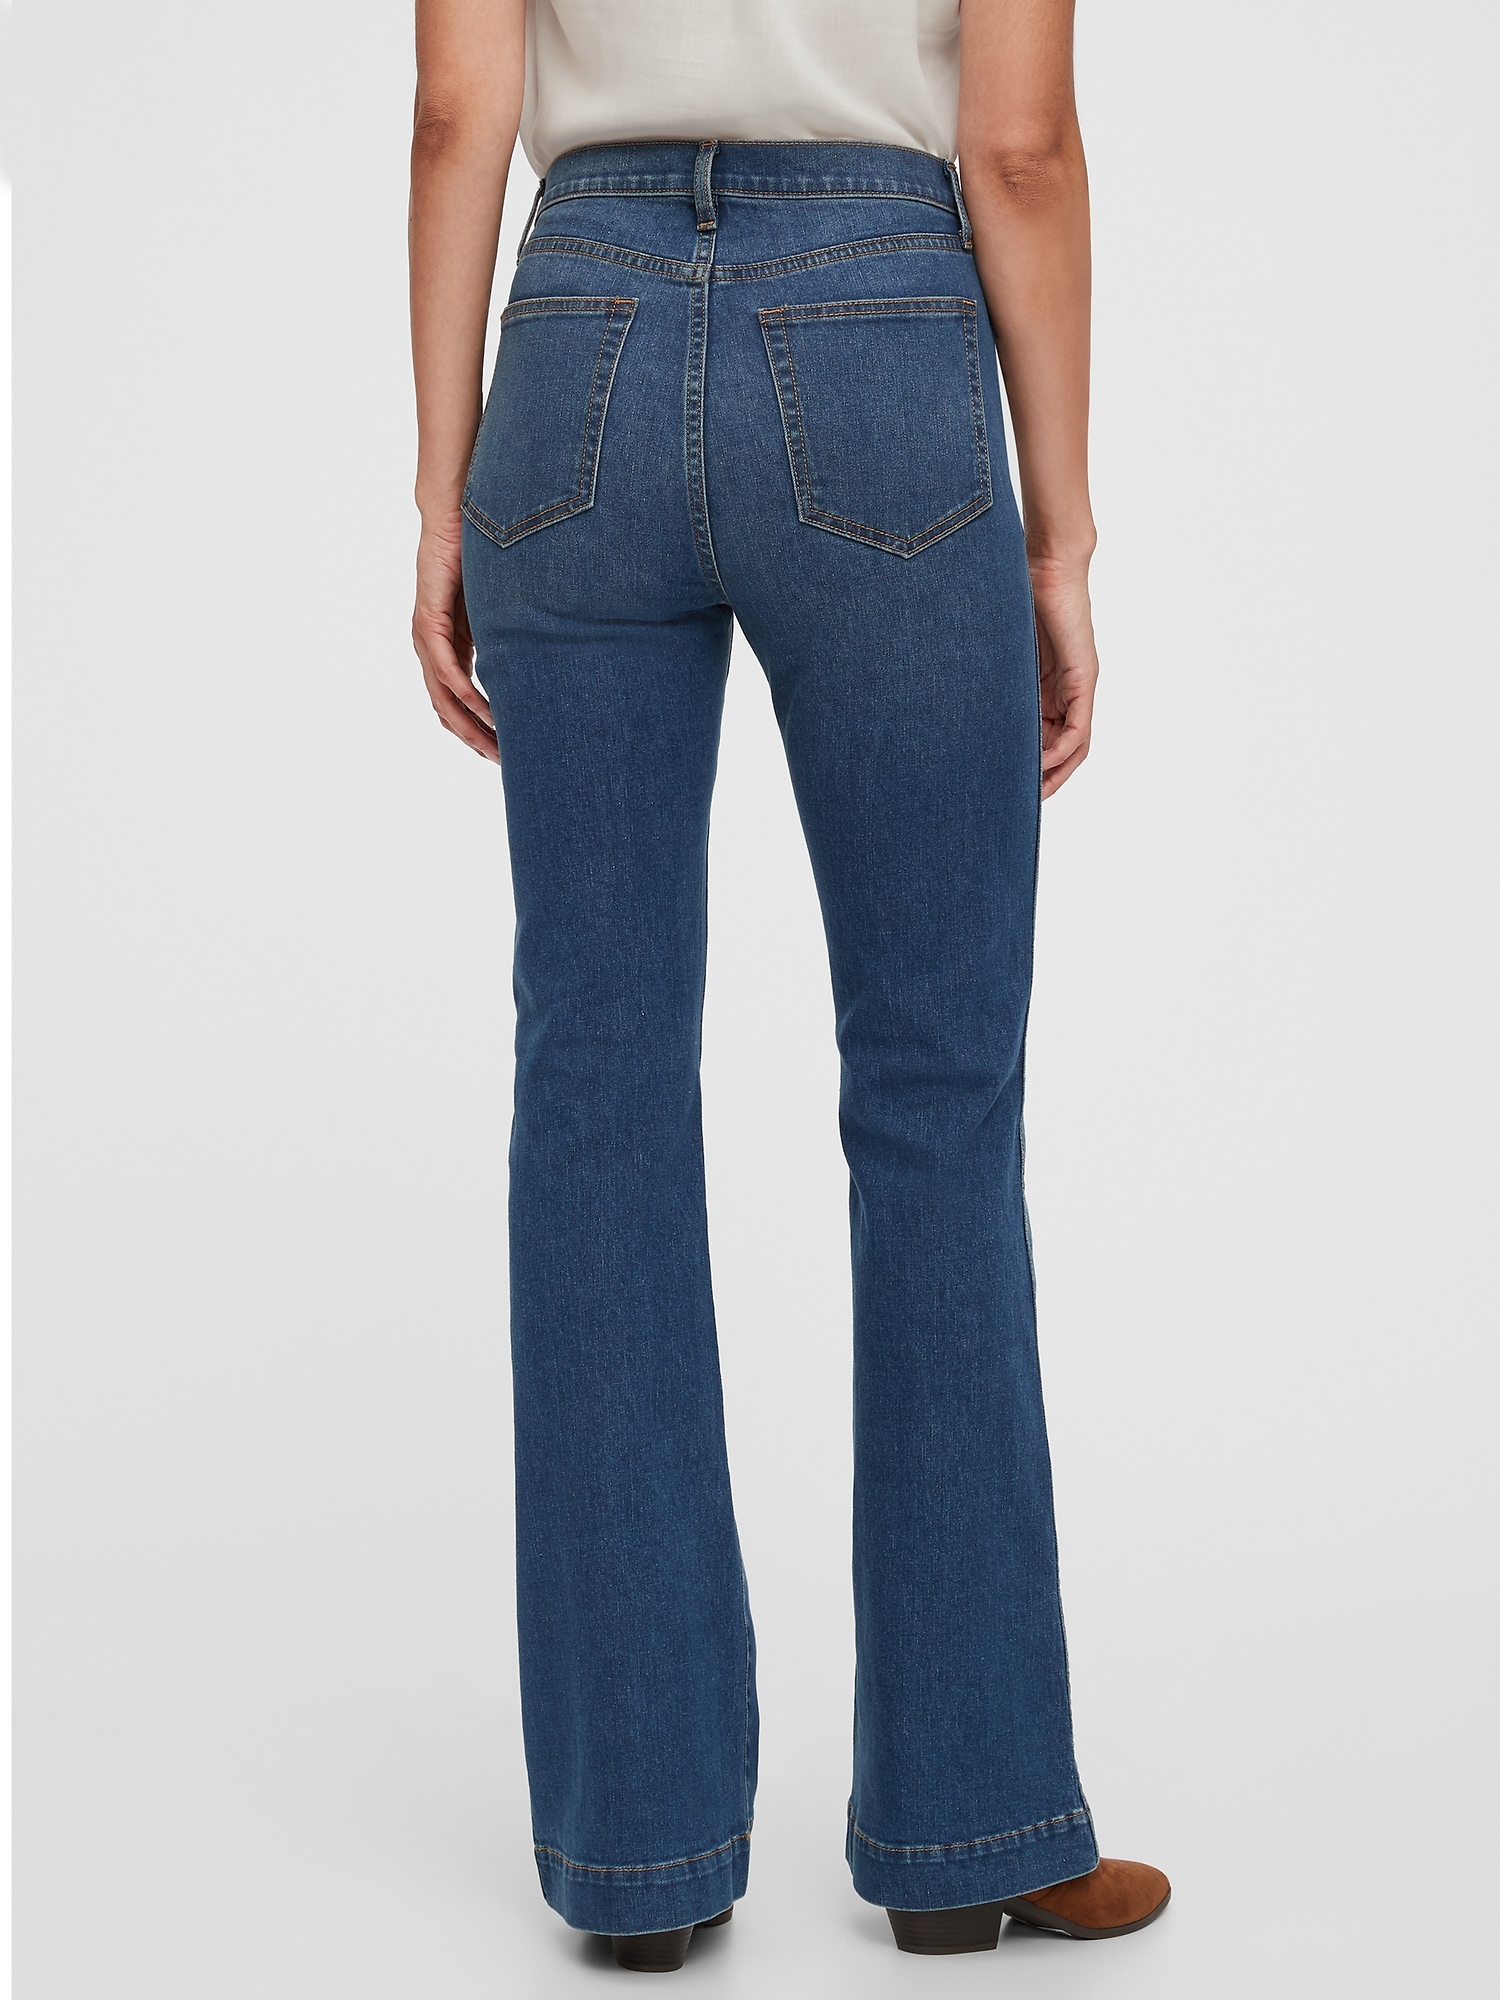 High Rise Flare Jeans With Washwell | Gap Factory